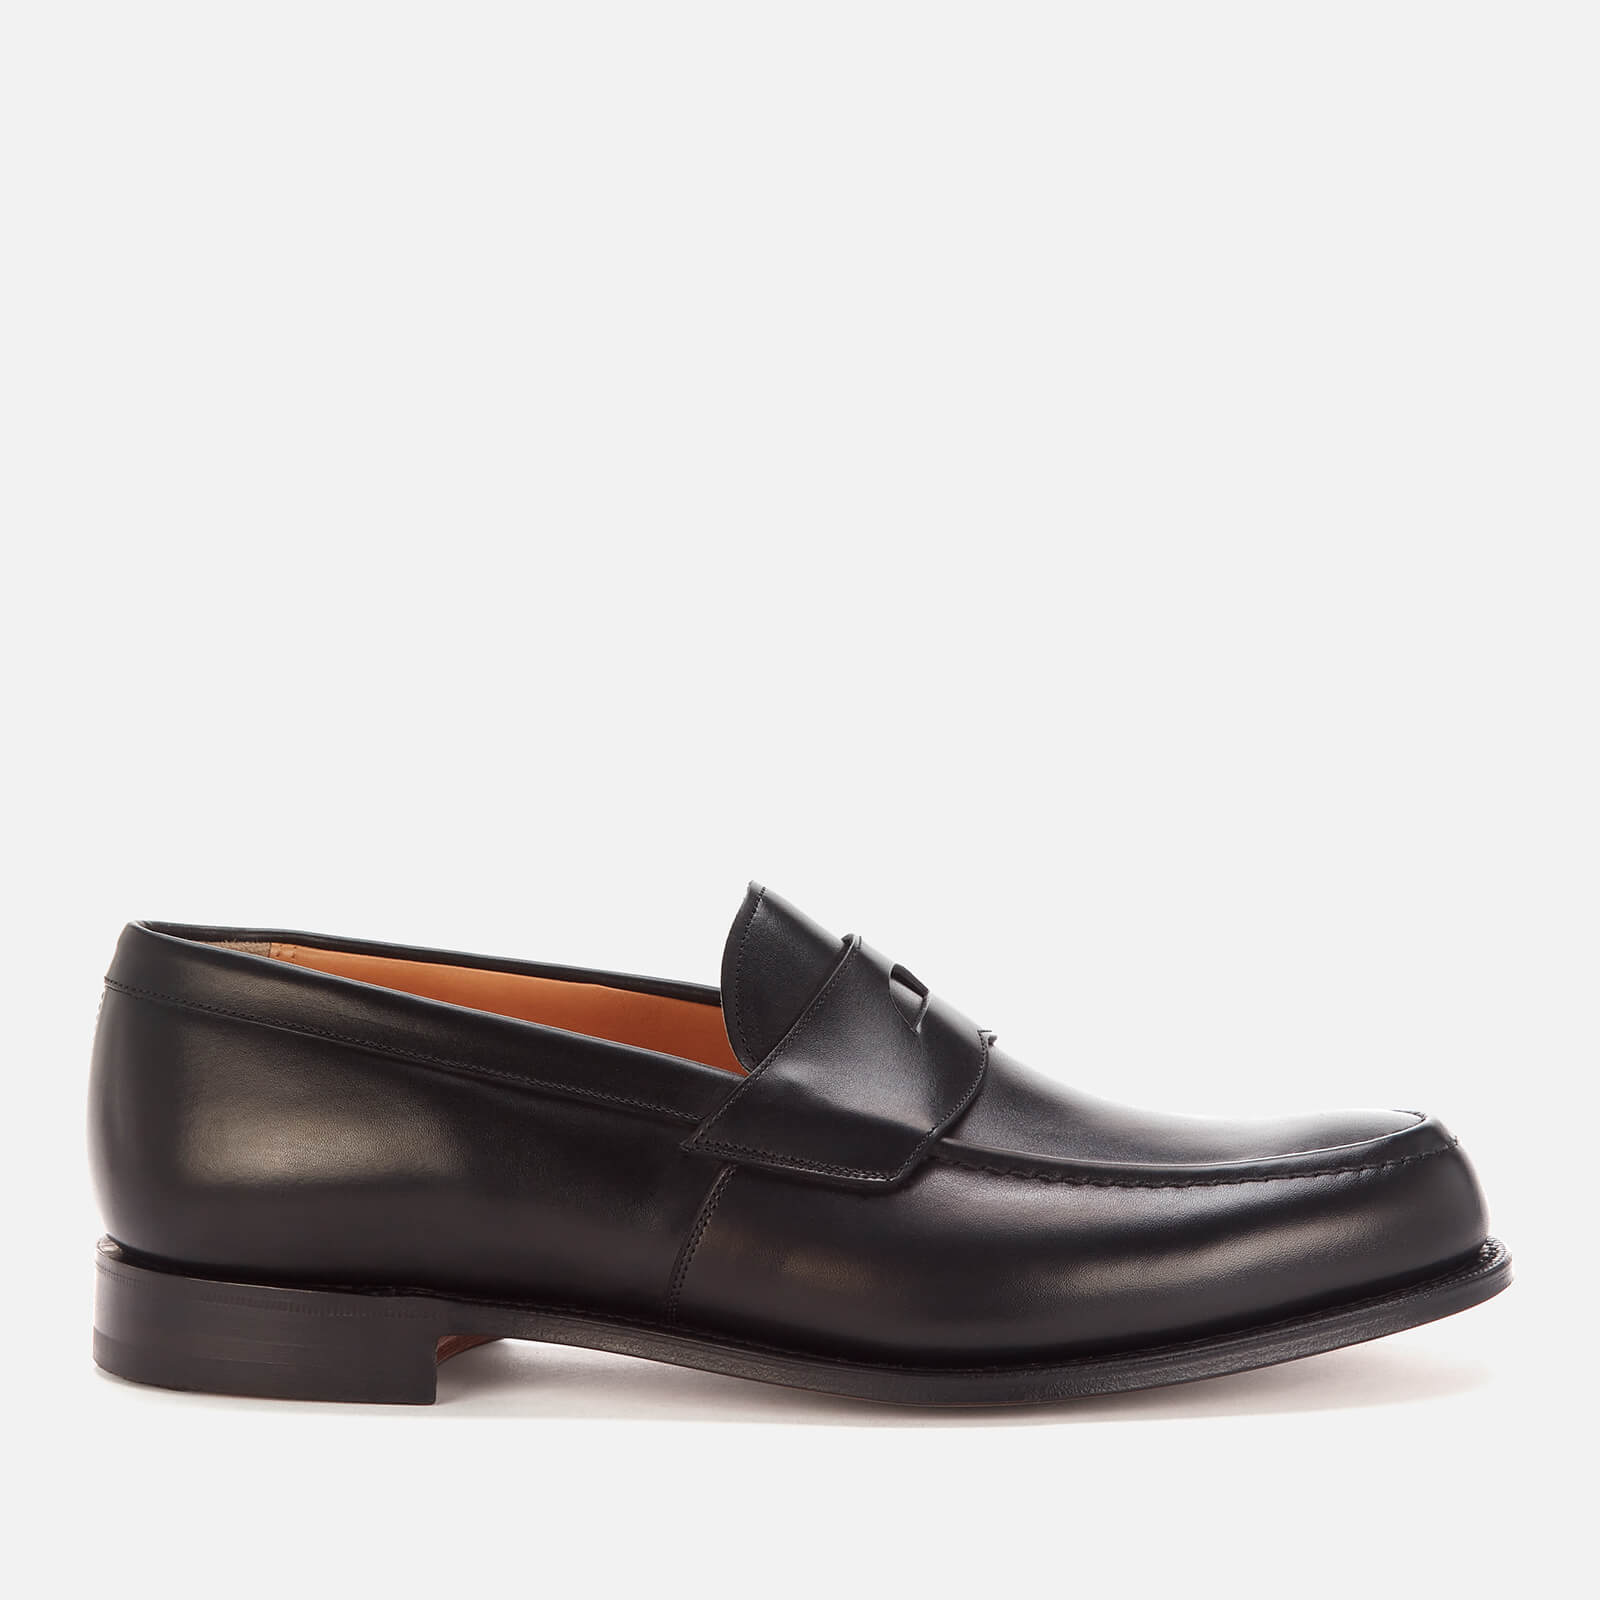 Church's Men's Dawley Leather Loafers - Black - UK 8